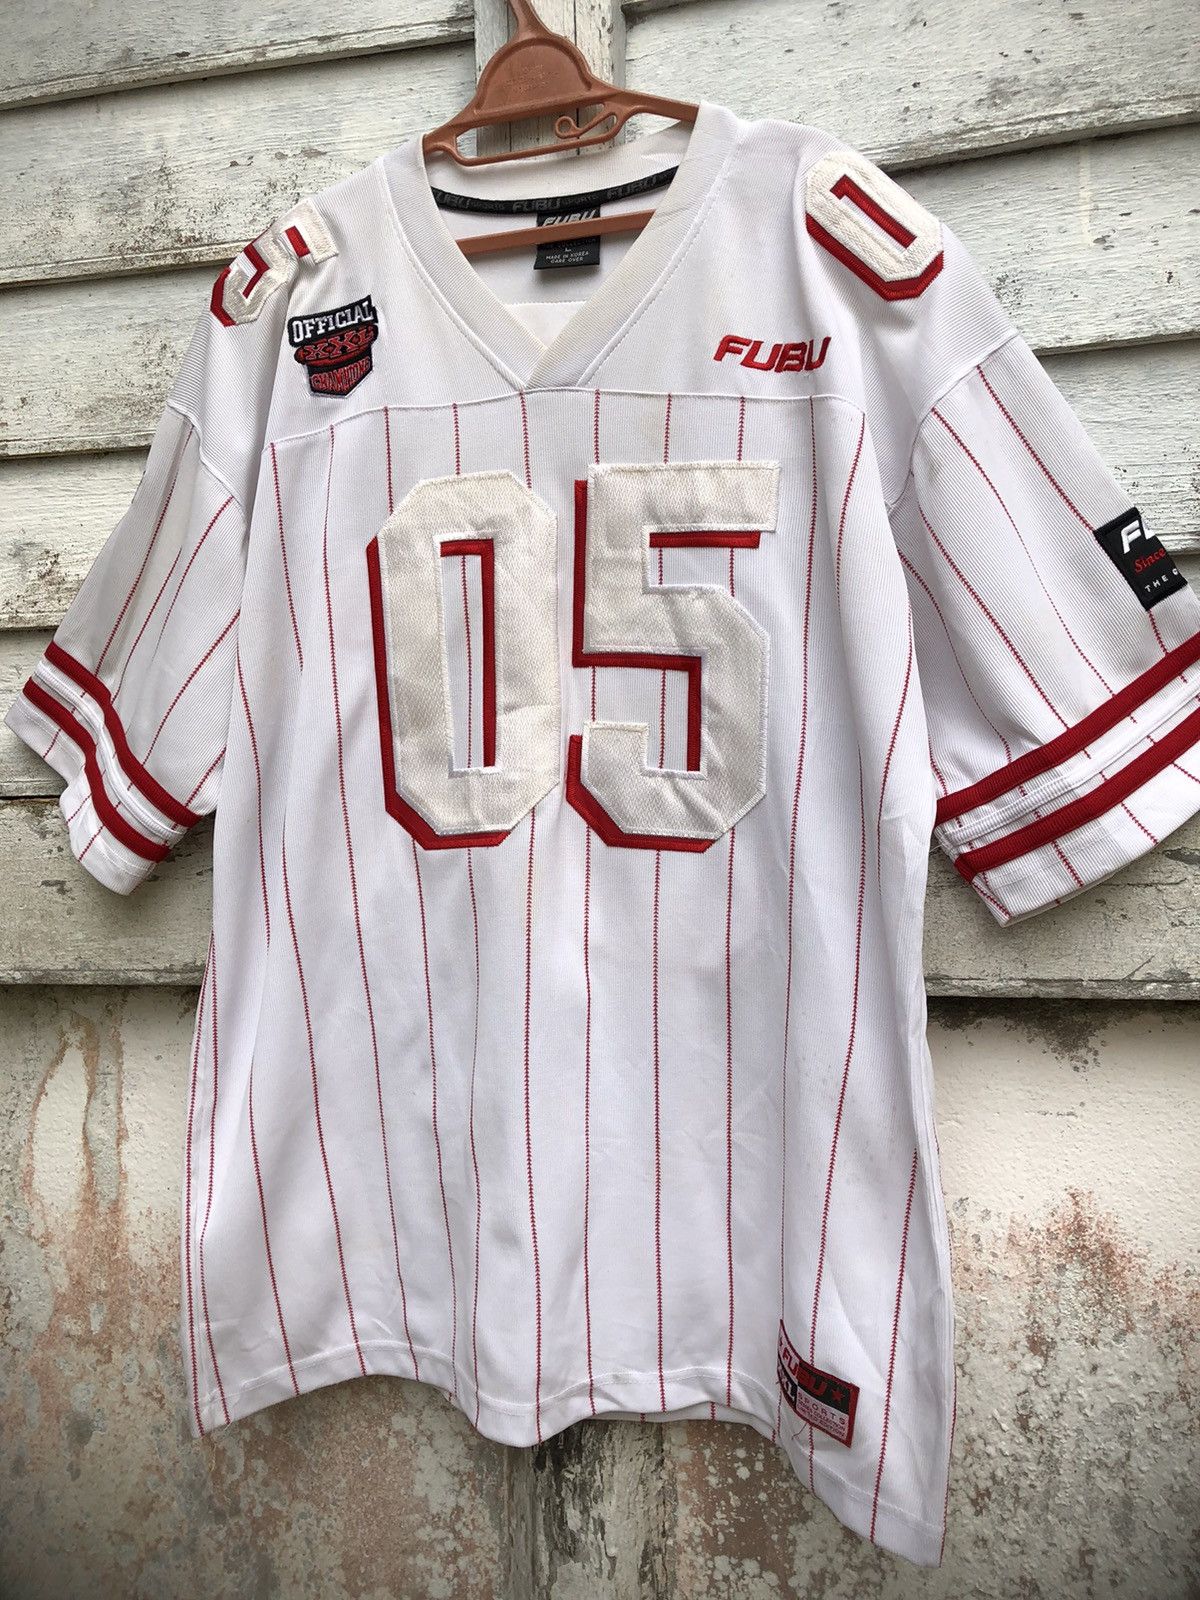 Vintage Limited Fubu 05 Rare Jersey Collection - 1